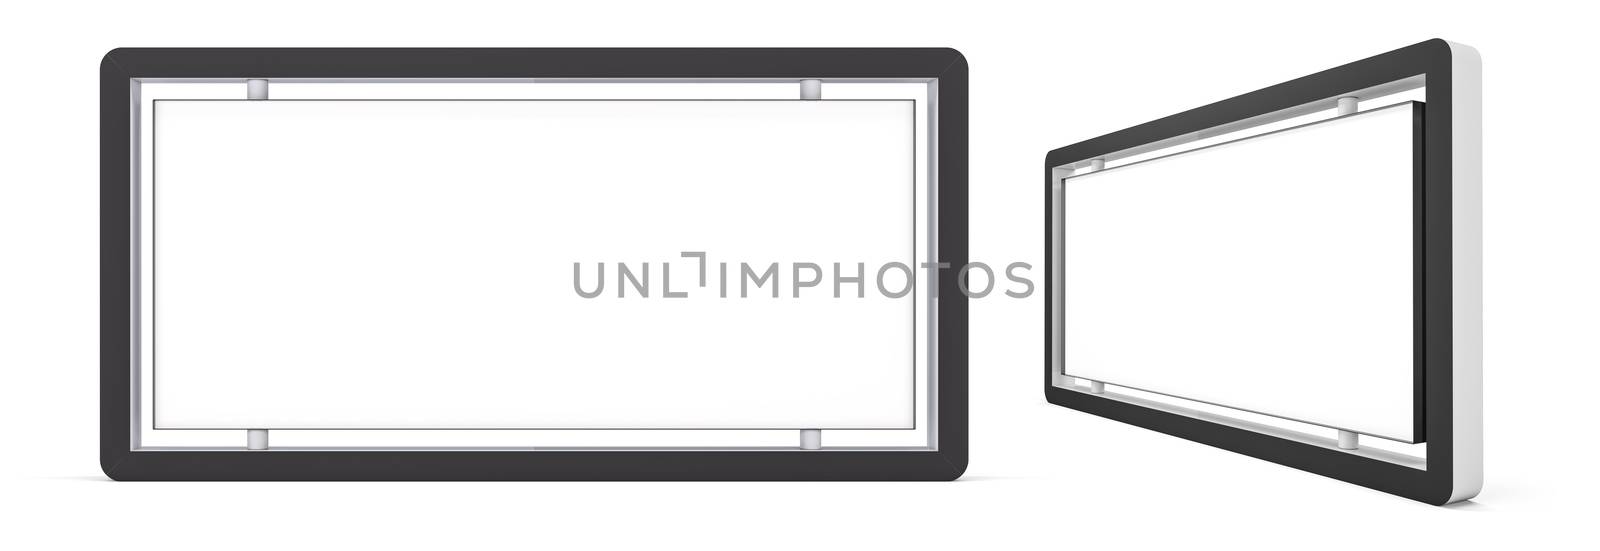 Set of outdoor white lightbox citylight advertising stand, isolated on white background. 3d illustration